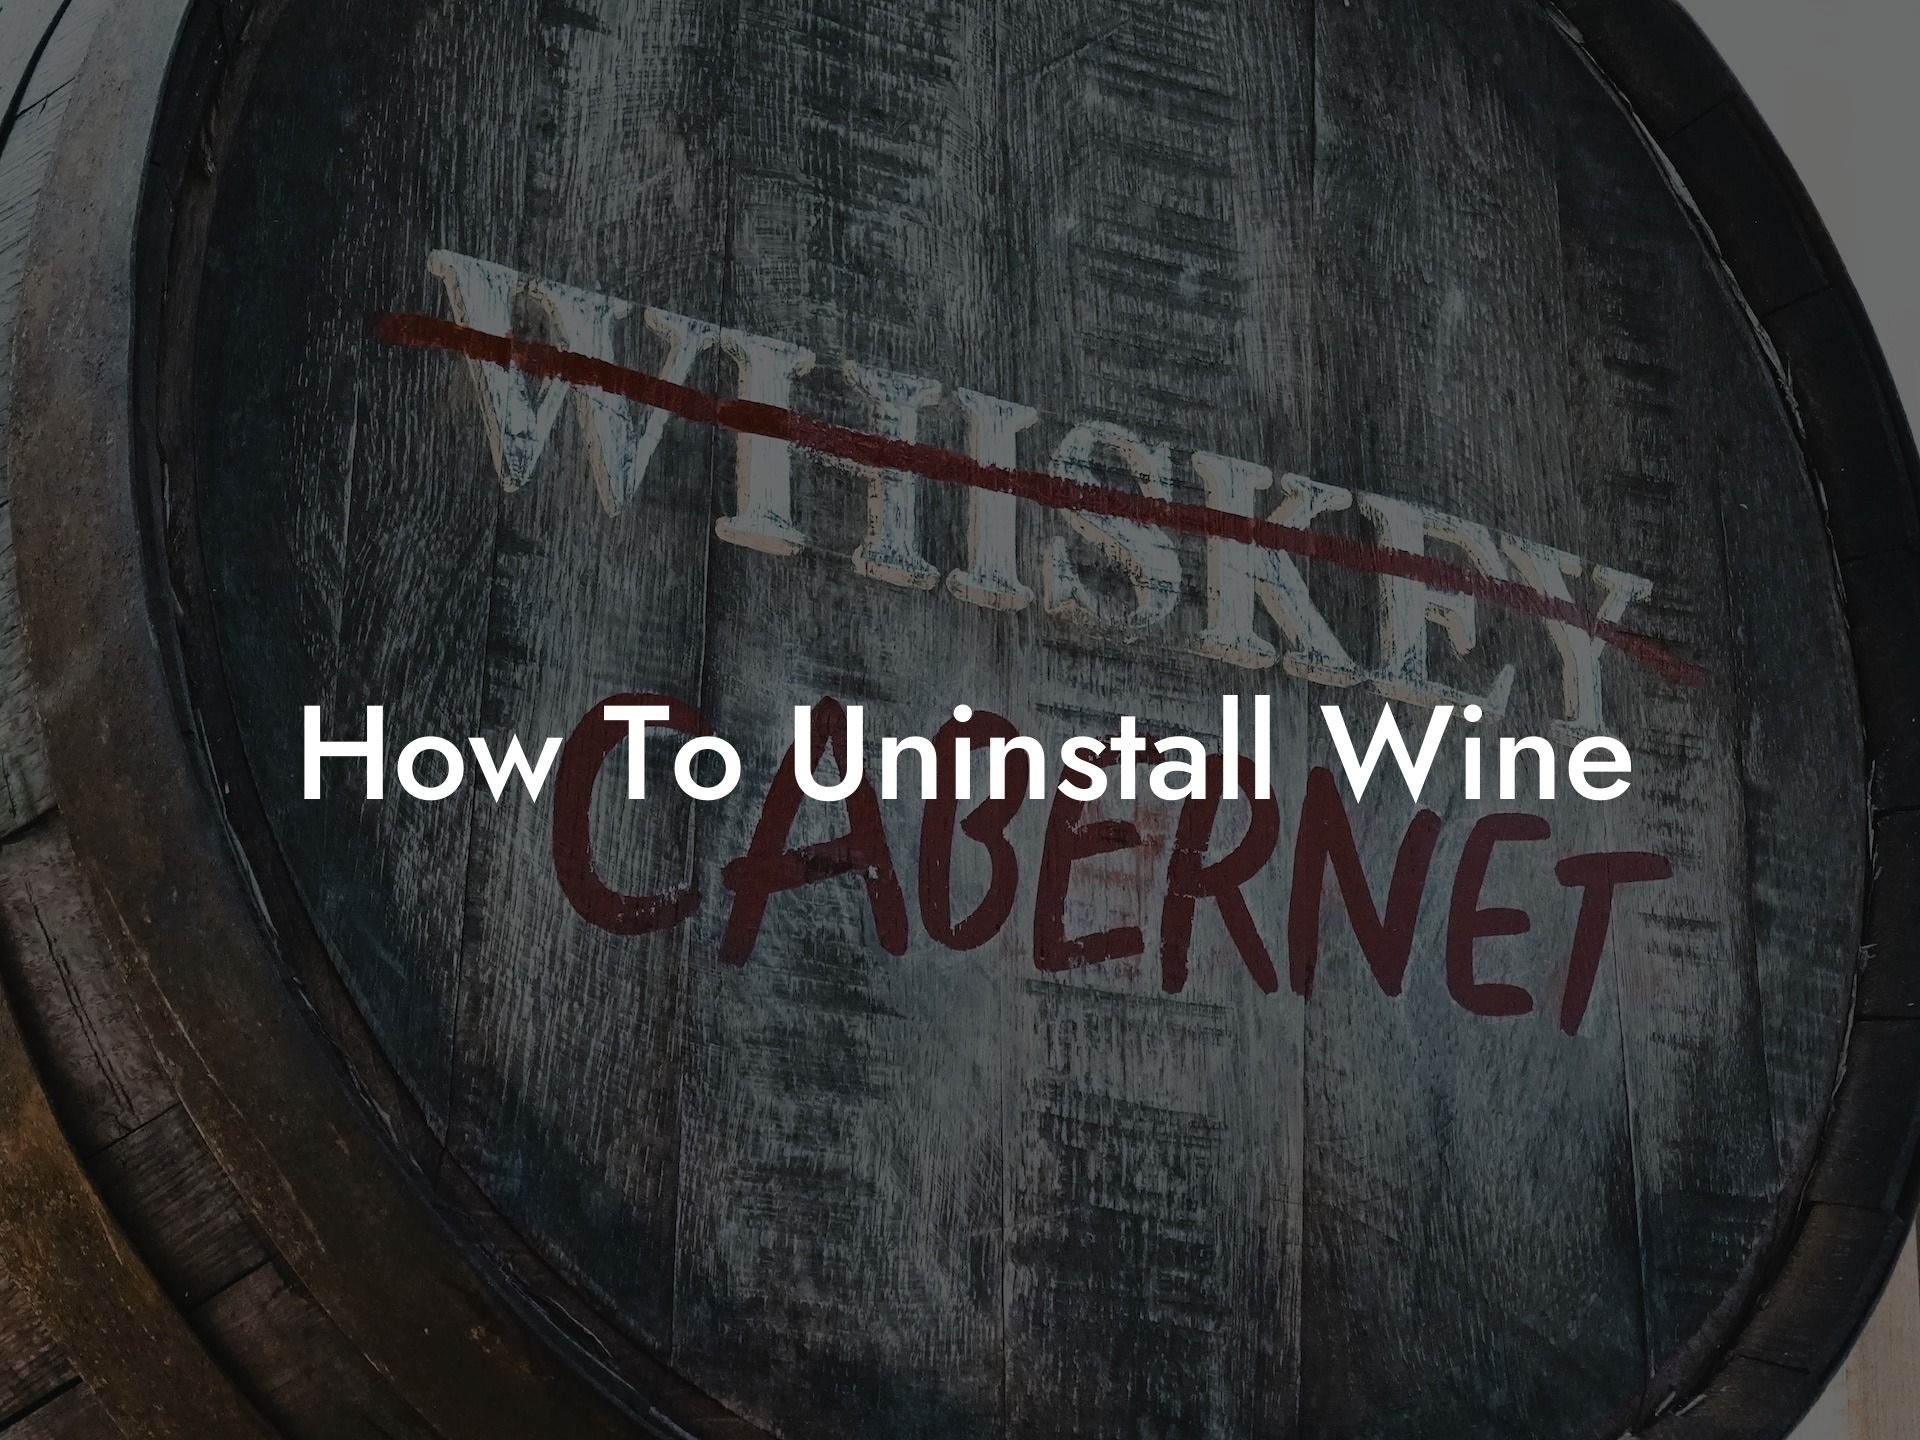 How To Uninstall Wine